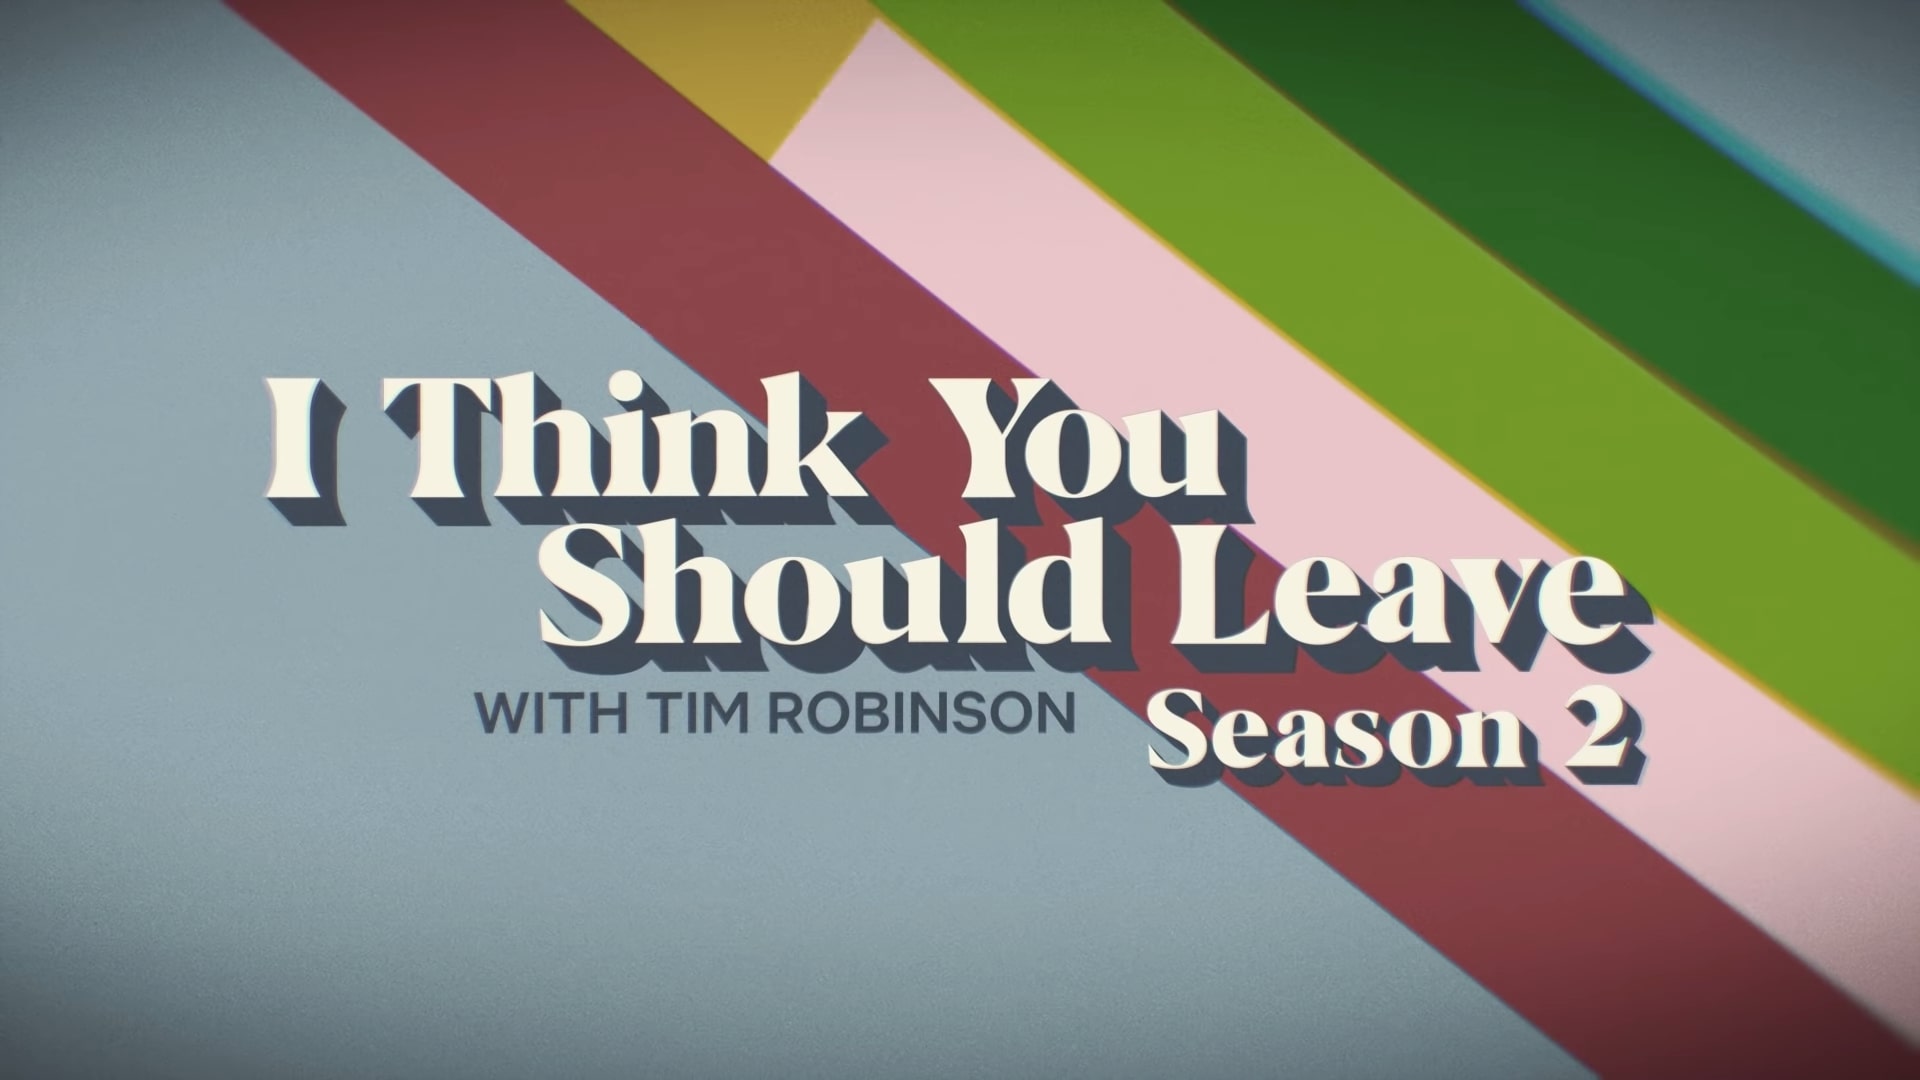 Netflix I Think You Should Leave with Tim Robinson Season 2 Trailer, Coming to Netflix in July 2021